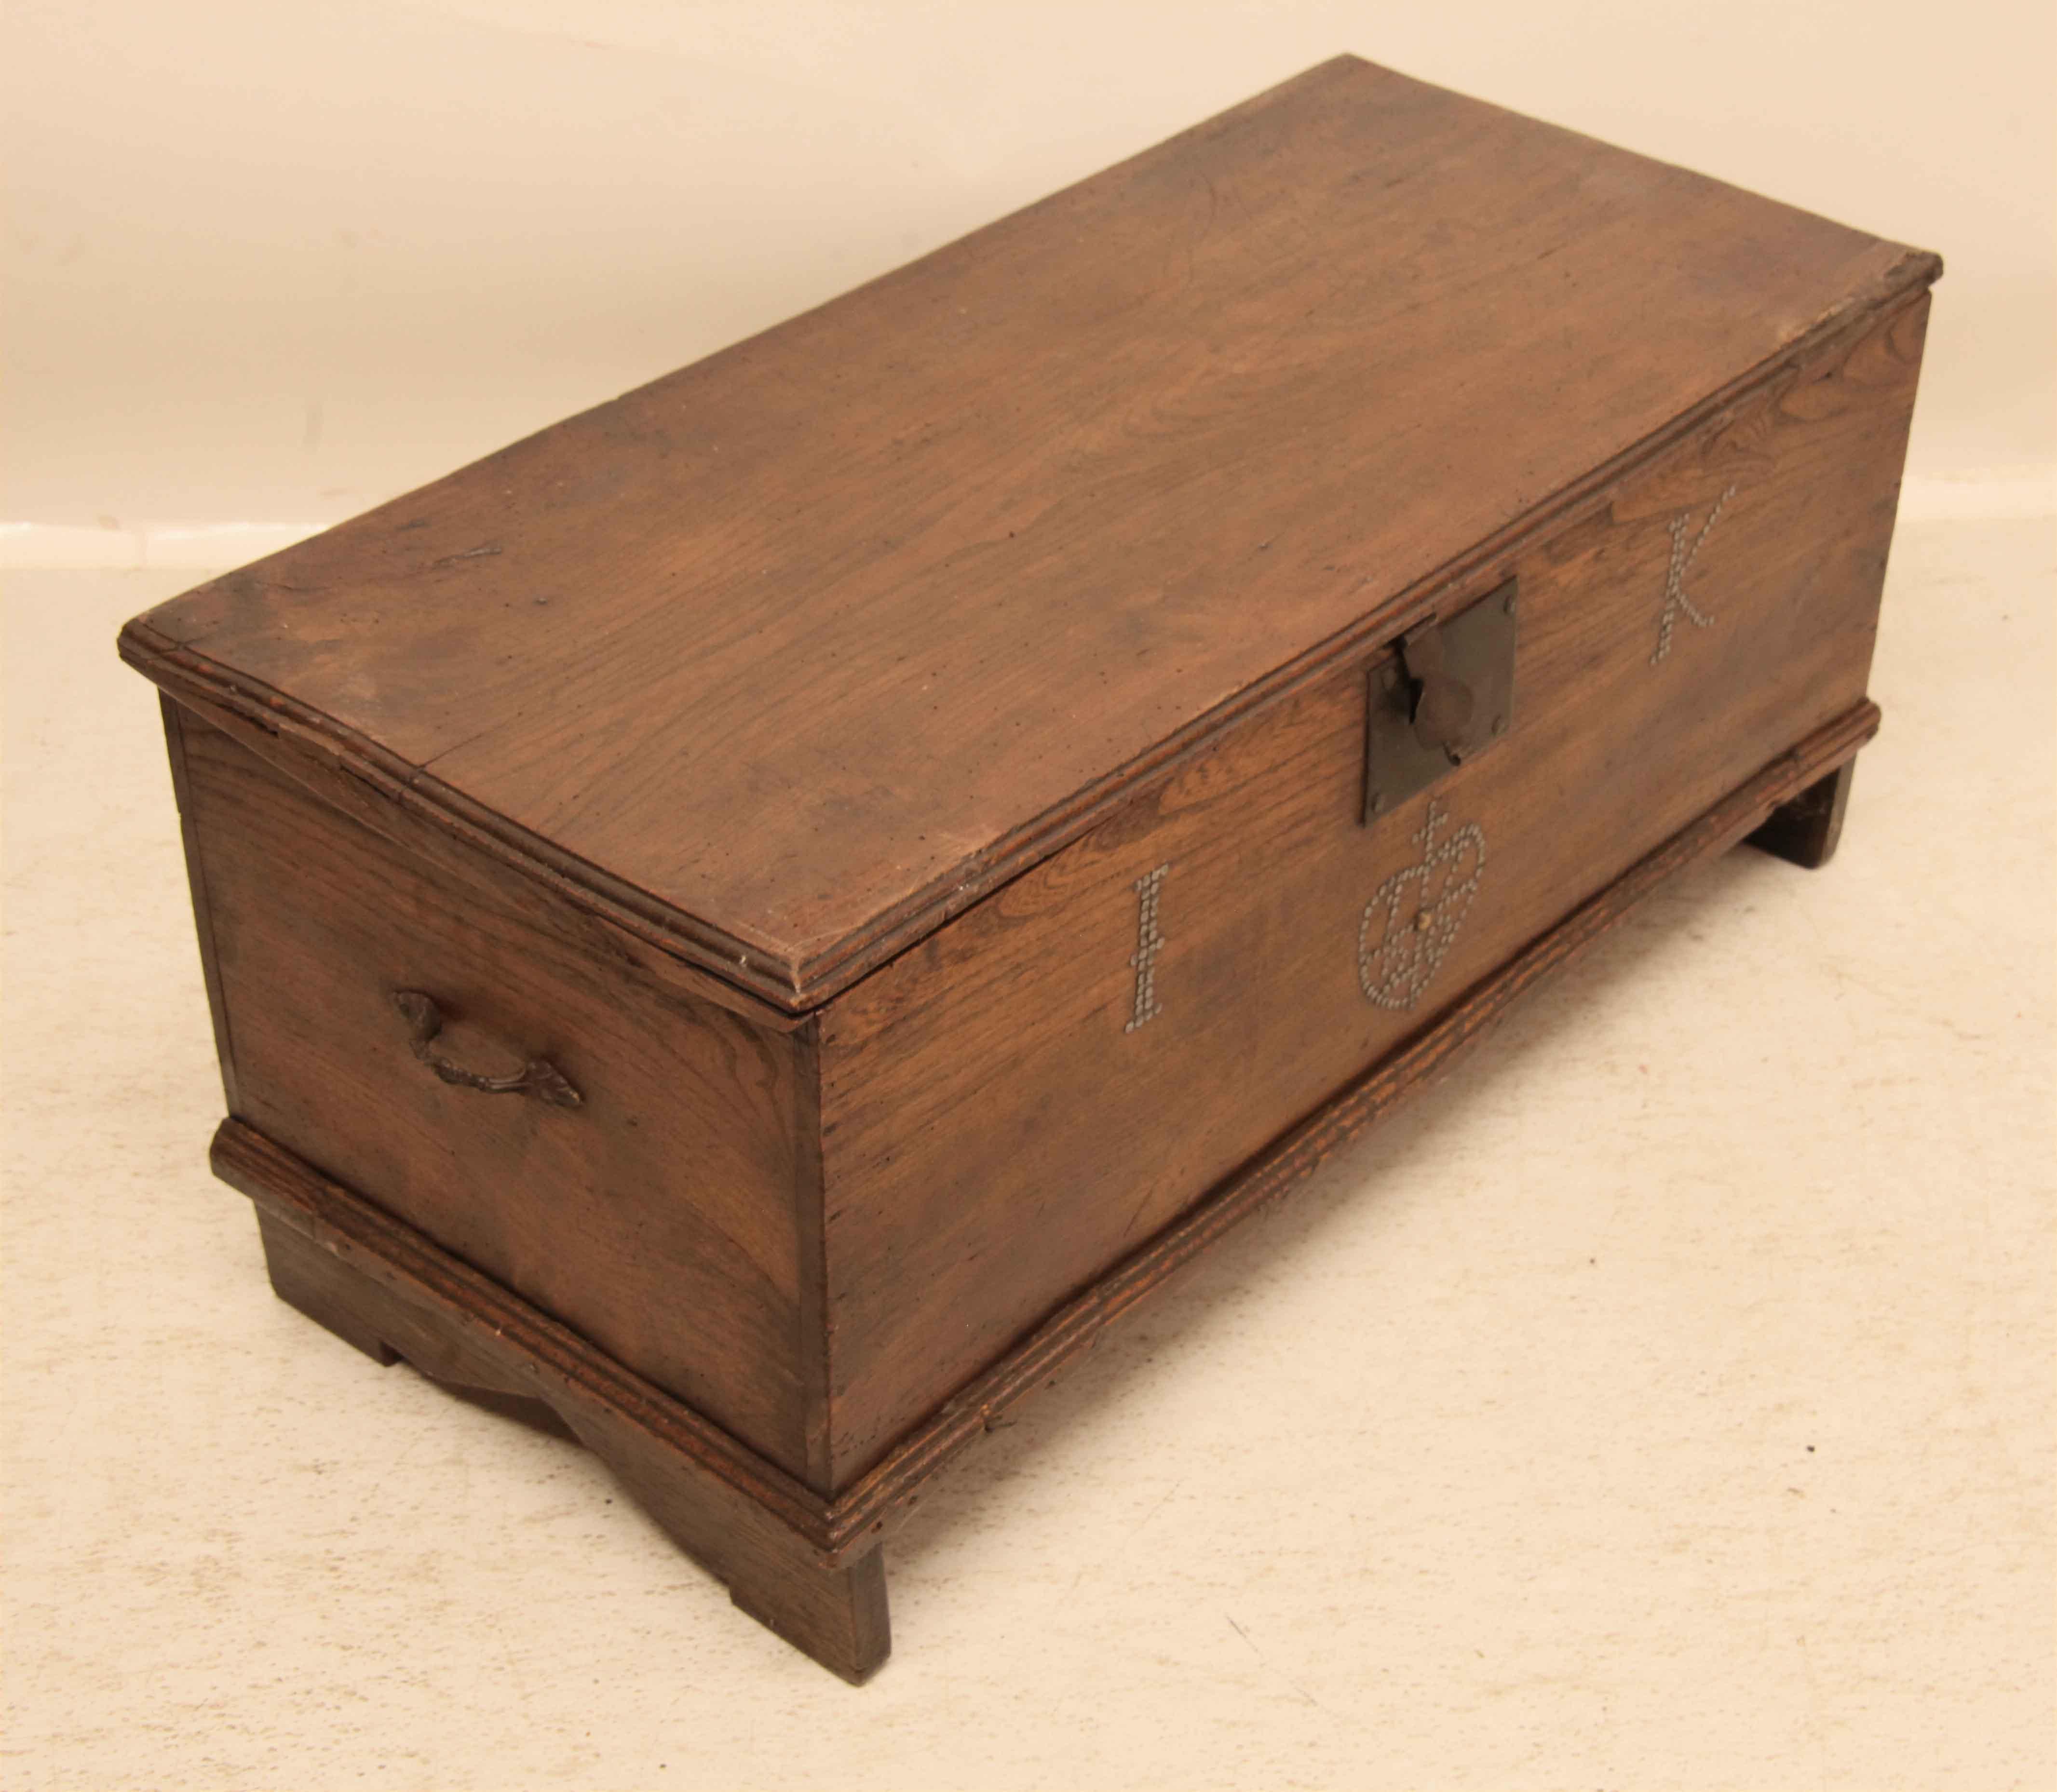 Early 18th century English elm coffer with beautiful original color and patina,  the diminutive size gives one lots of options for uses in the home.  The front has two features done with miniature round head metal nails- the large initials 